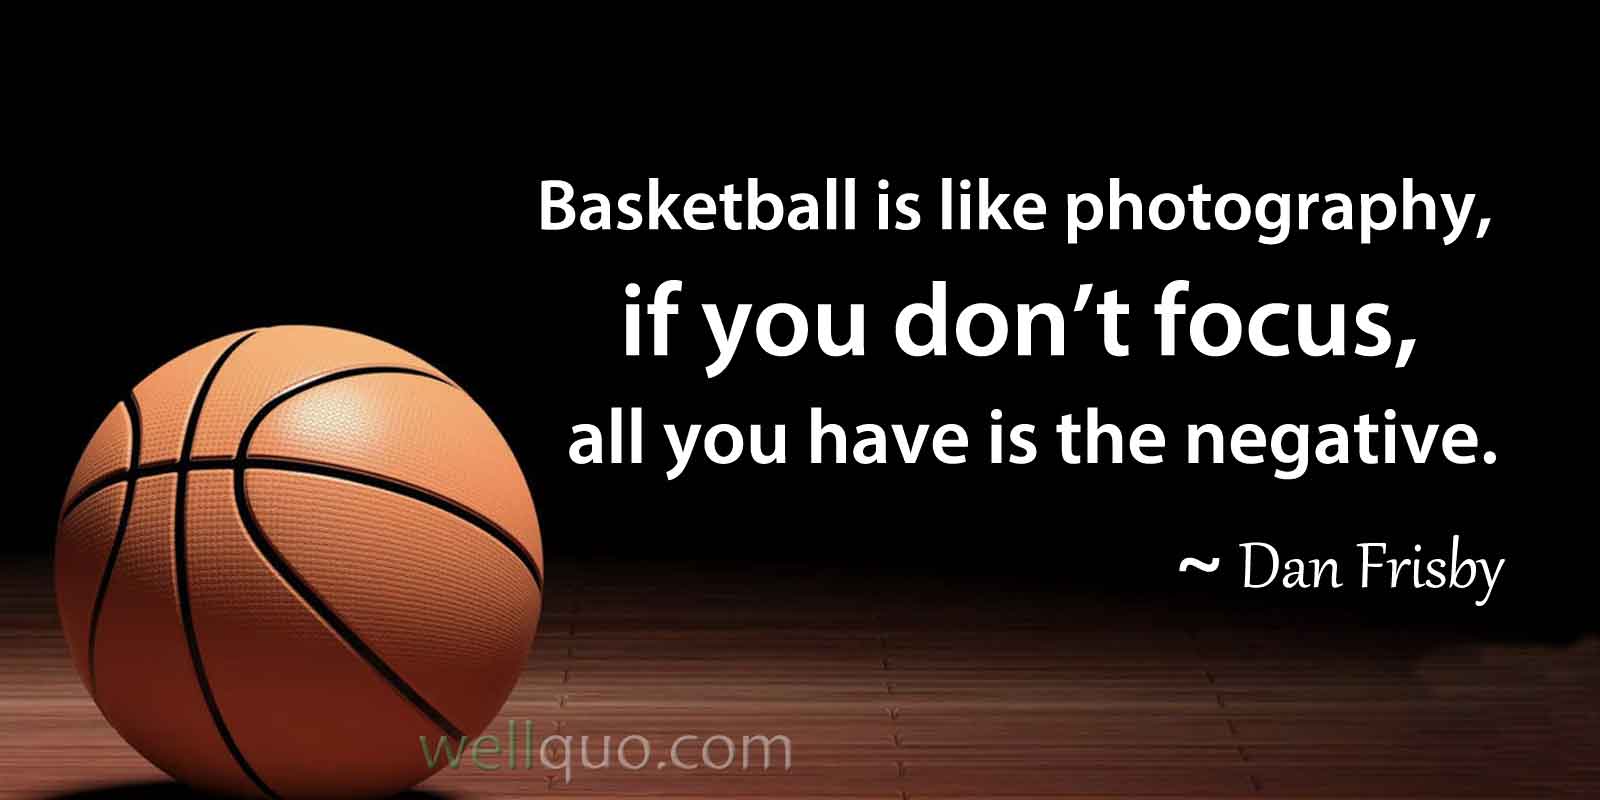 Basketball Quotes: Wisdom, Motivation, and Hoops Inspiration - Well Quo